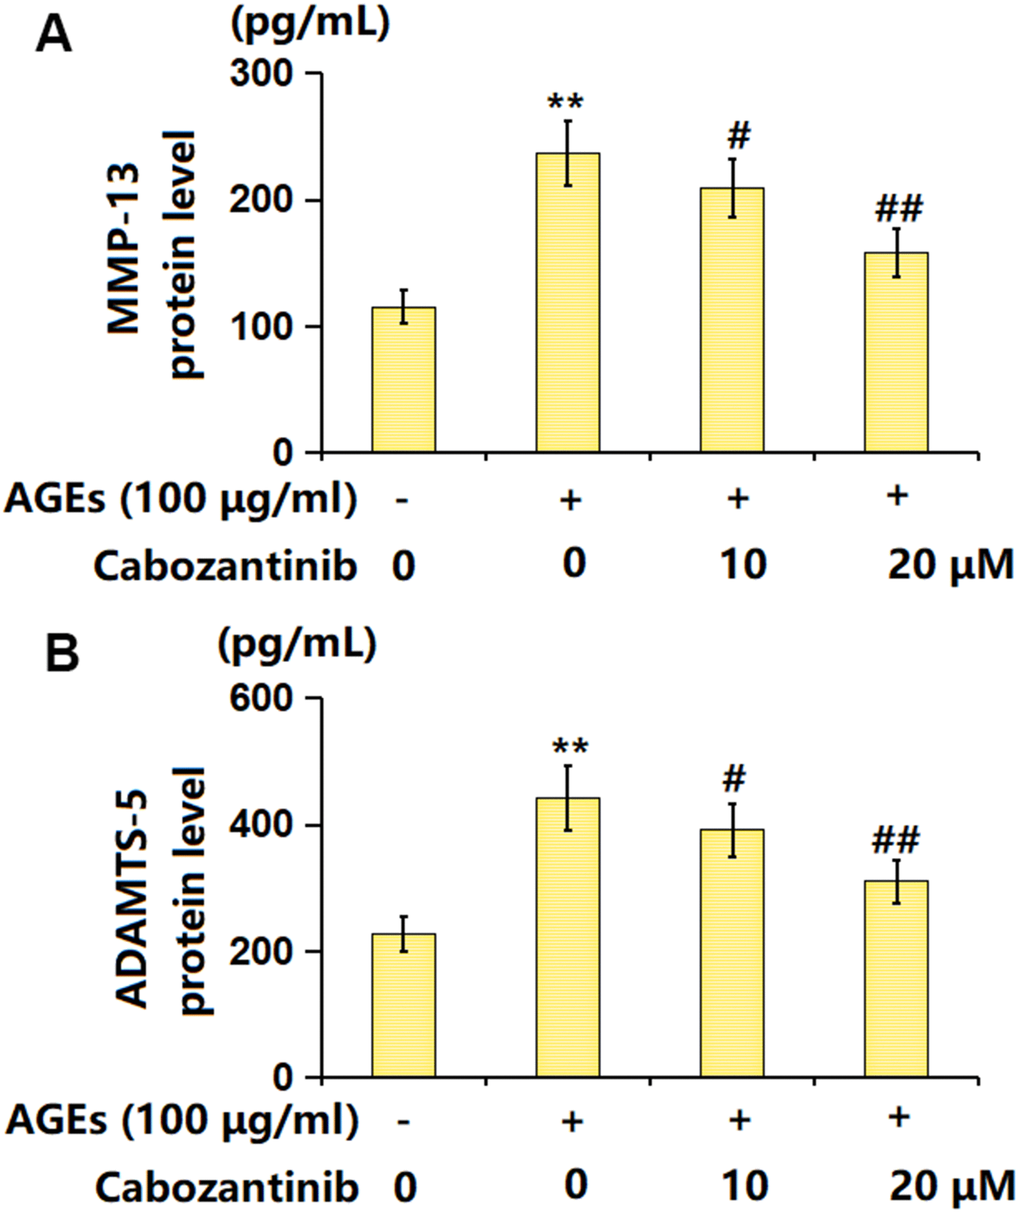 Cabozantinib repressed the levels of MMP-13 and ADAMTS-5 in AGEs-treated SW1353 chondrocytes. SW1353 chondrocytes were stimulated with 100 μg/ml AGEs with or without 10 and 20 μM Cabozantinib for 24 h. (A) The protein level of MMP-13 was determined by the ELISA assay. (B) The protein level of ADAMTS-5 was determined by the ELISA assay (n=6, *, ** PP